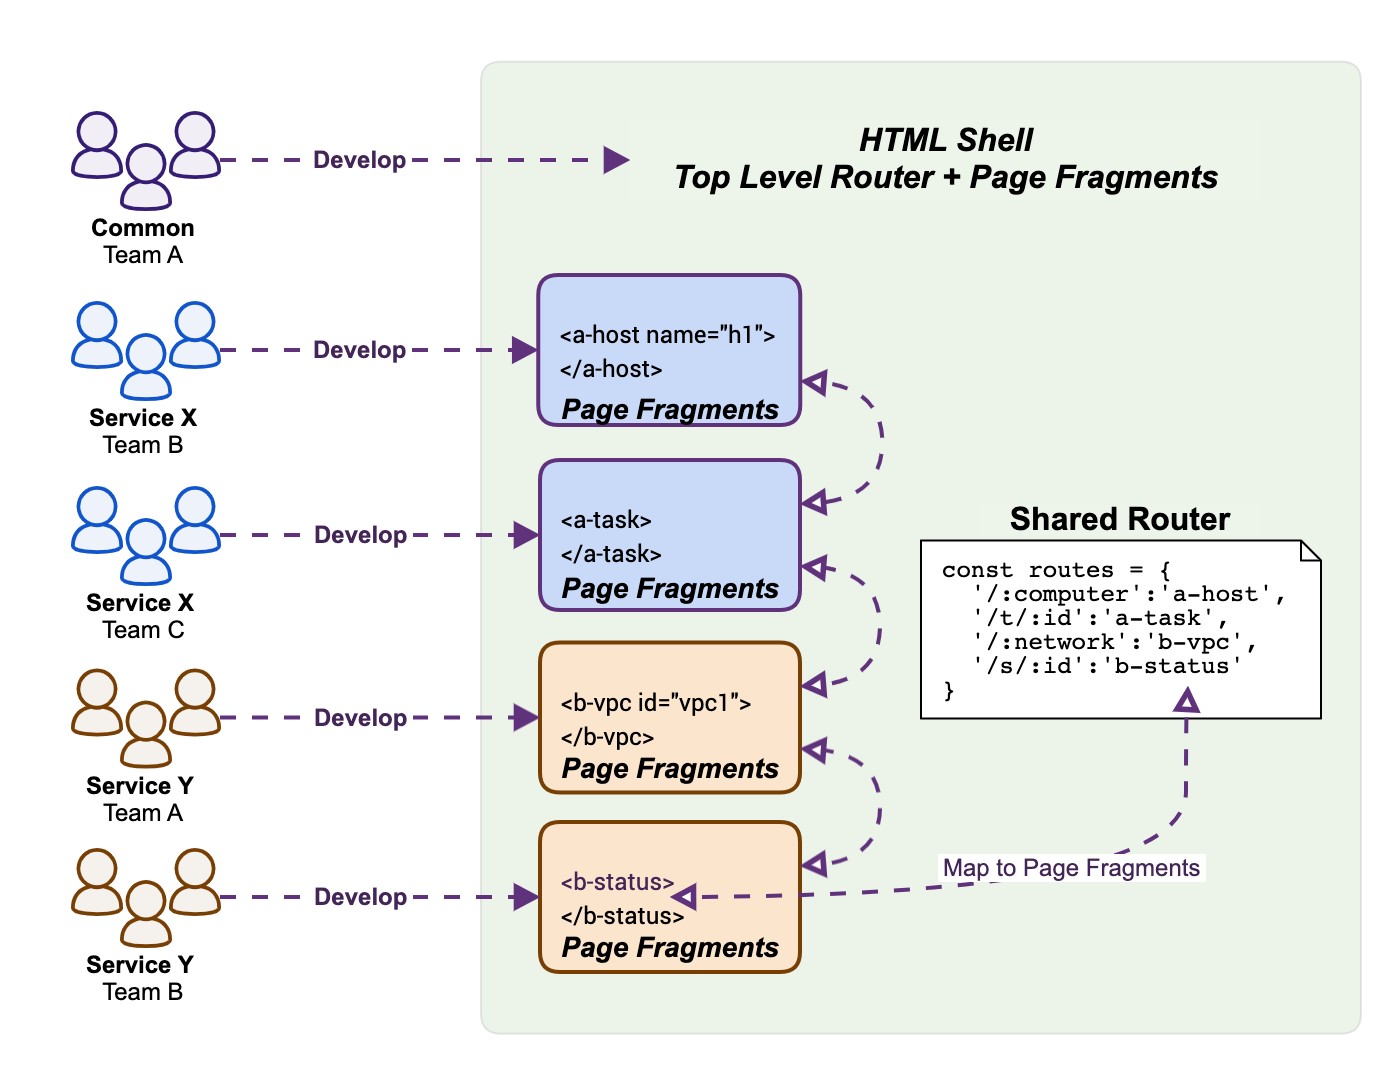 Figure 7 - Top Level Router and Page Fragments